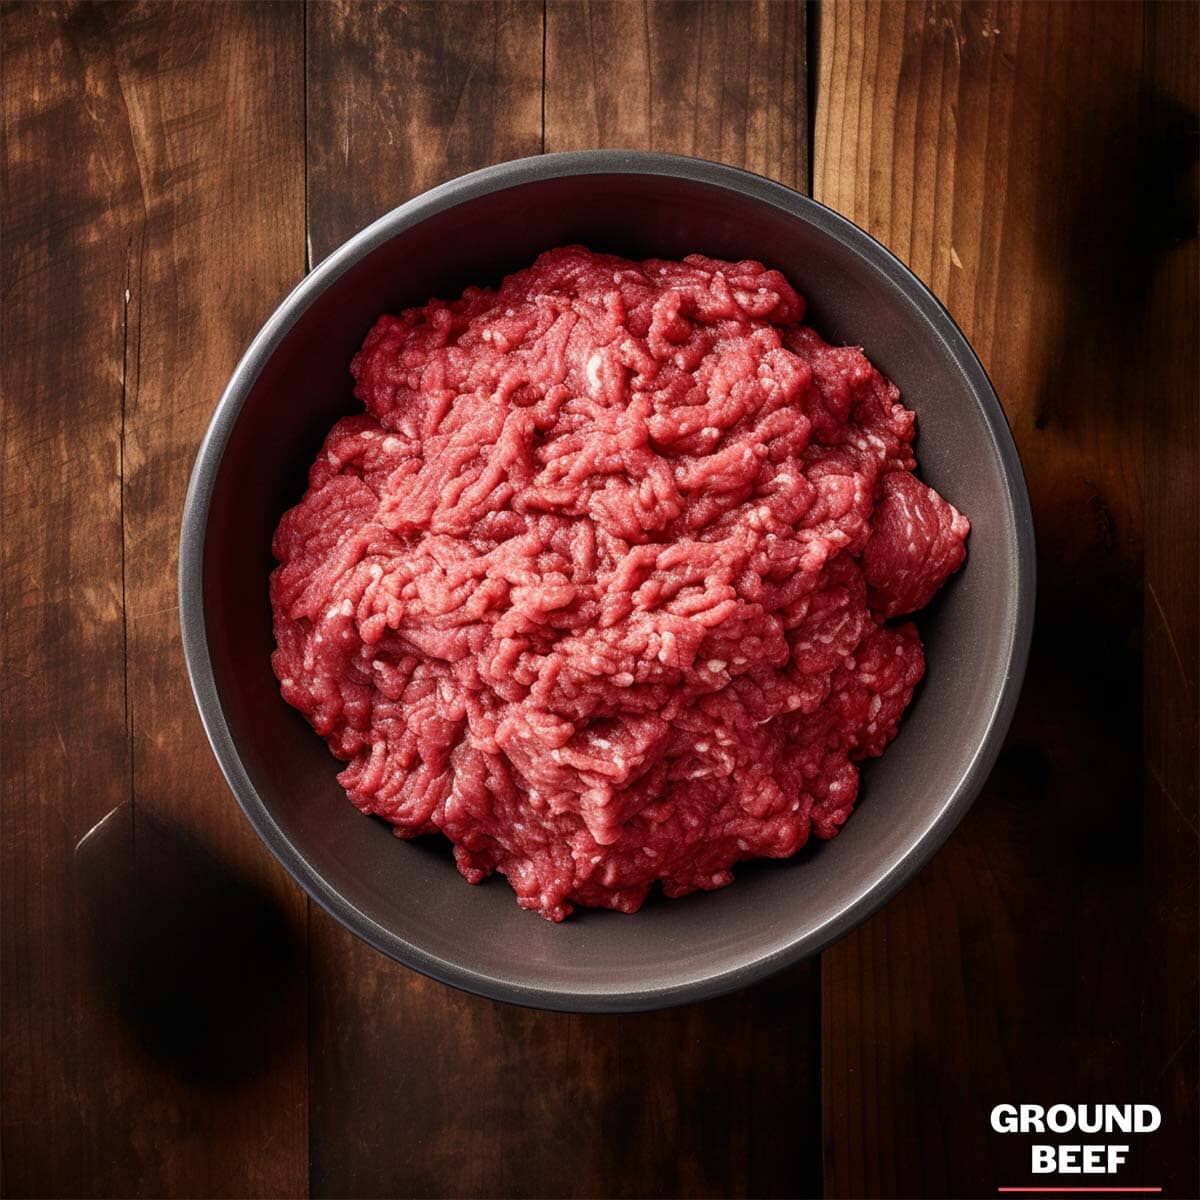 Ground Beef Box Beef Sonne Farms 